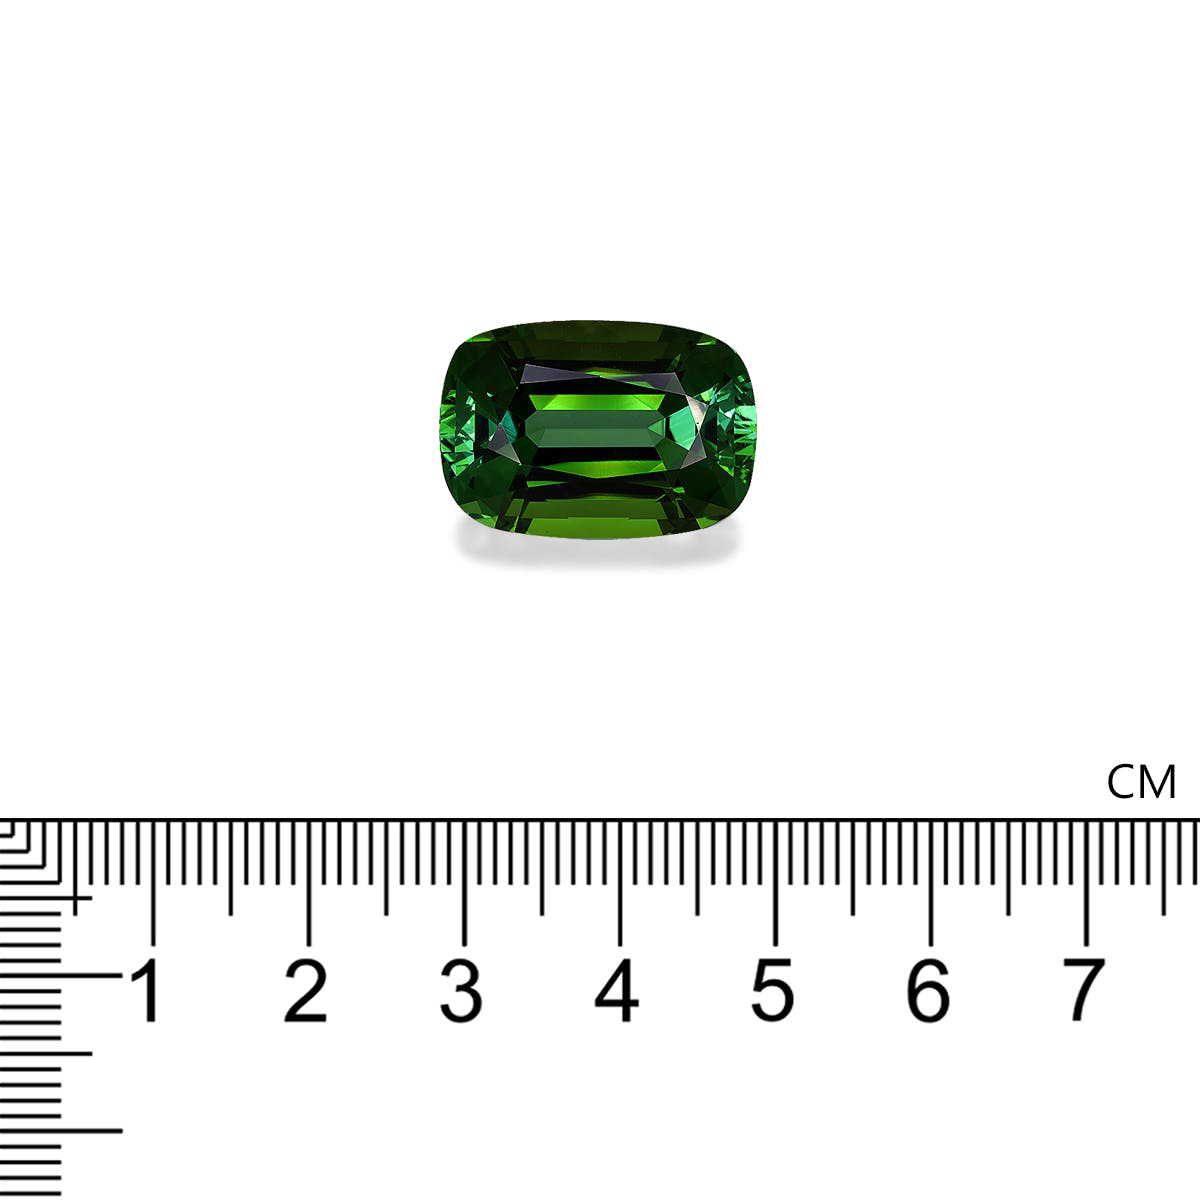 Picture of Forest Green Tourmaline 20.66ct (TG1574)